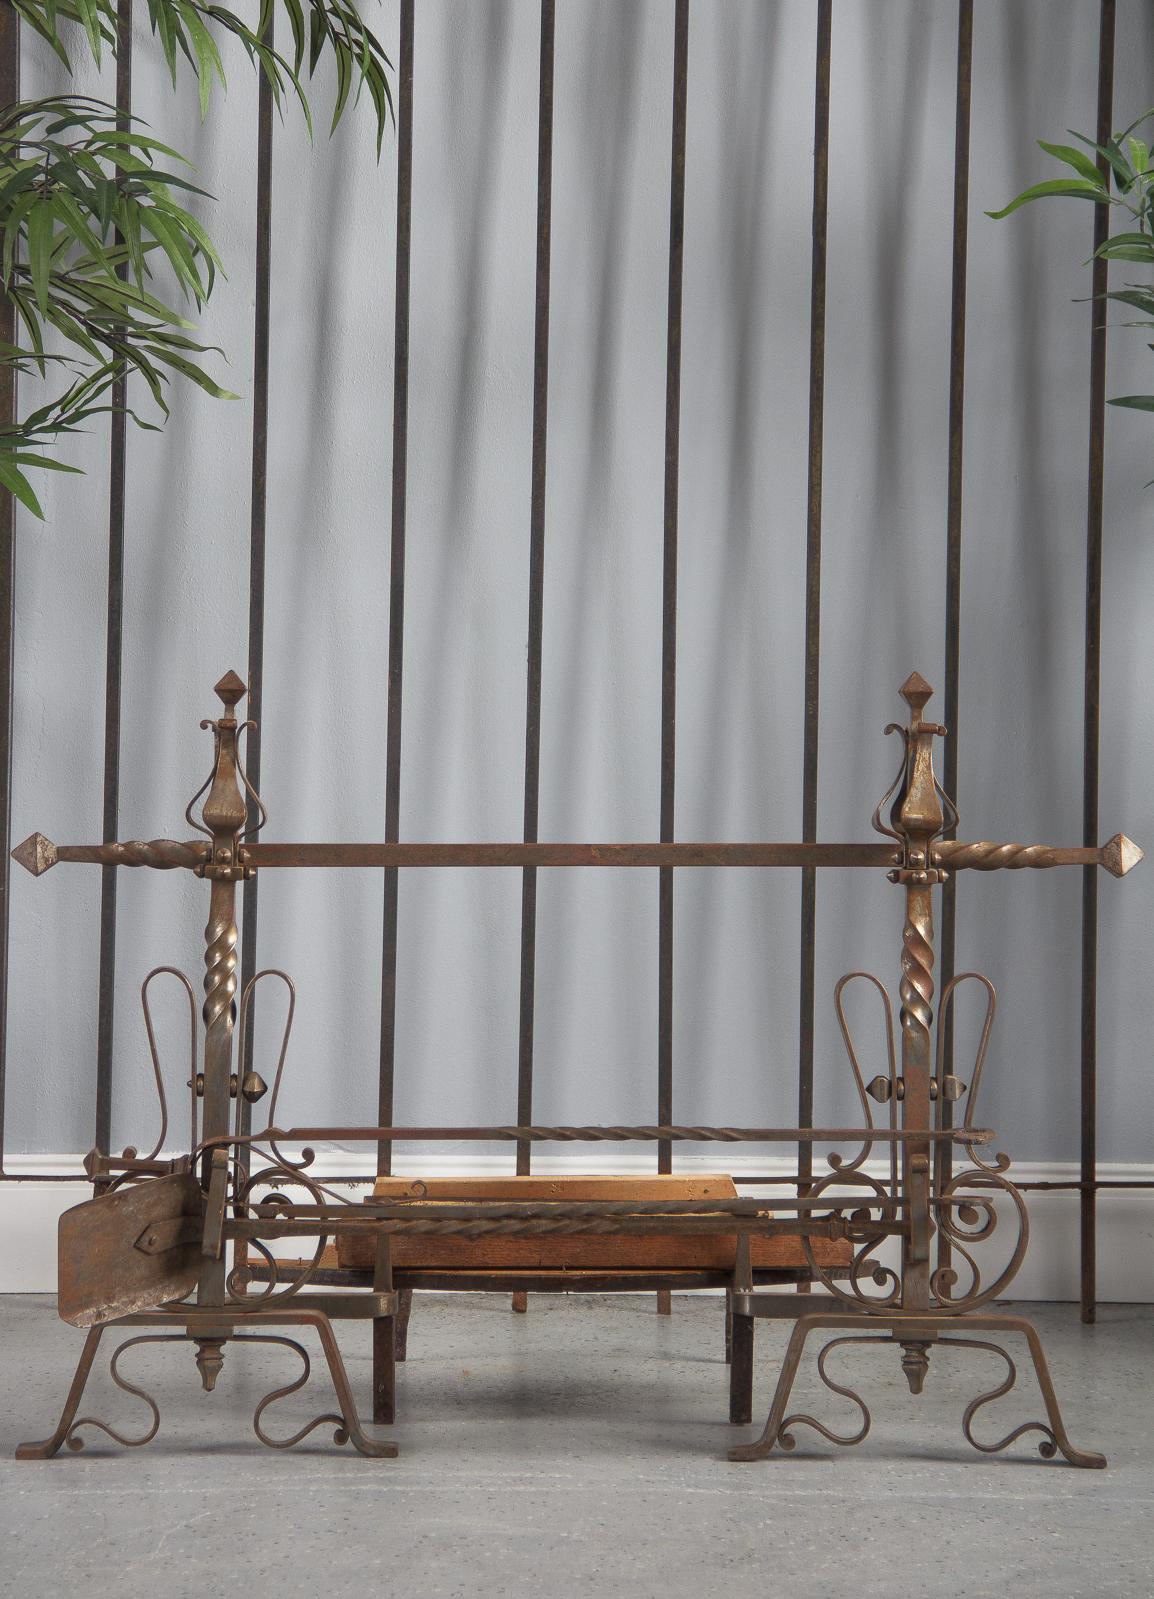 An ornate pair of wrought iron fireplace andirons with guard and accessories, French, 20th century. Heavily scrolled bases sprout posts with twisted elements, capped by curled petal pieces over studded elements, and tipped with square finials. The